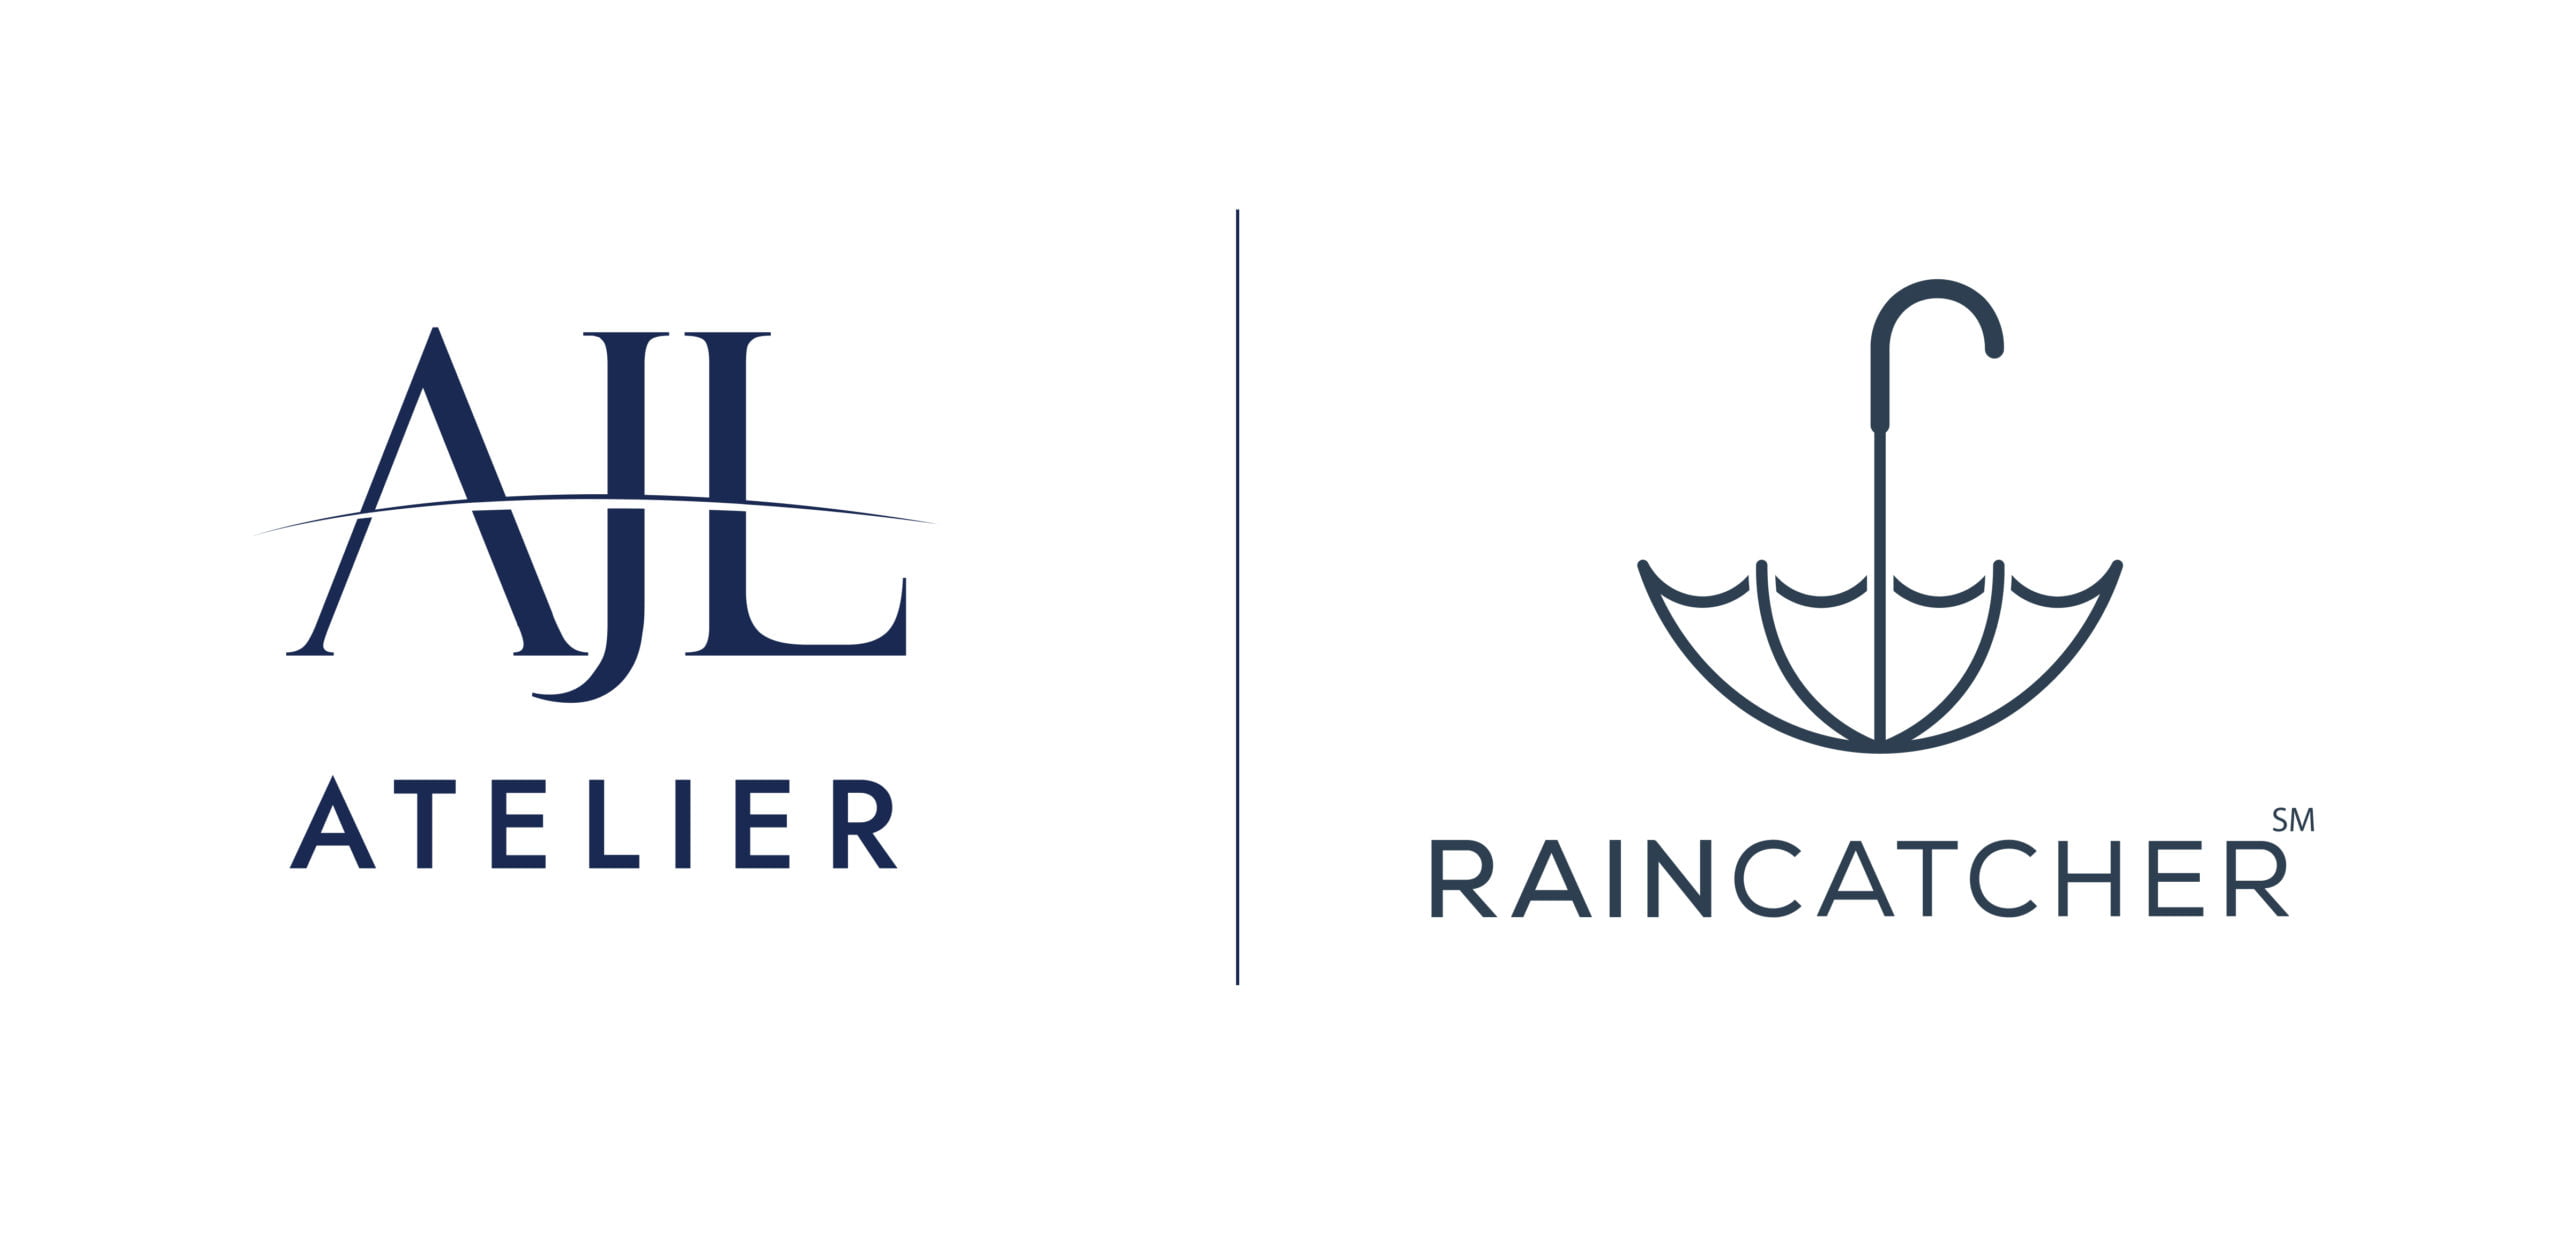 Partner logo of AJL Atelier and Cambon Partners on financial services